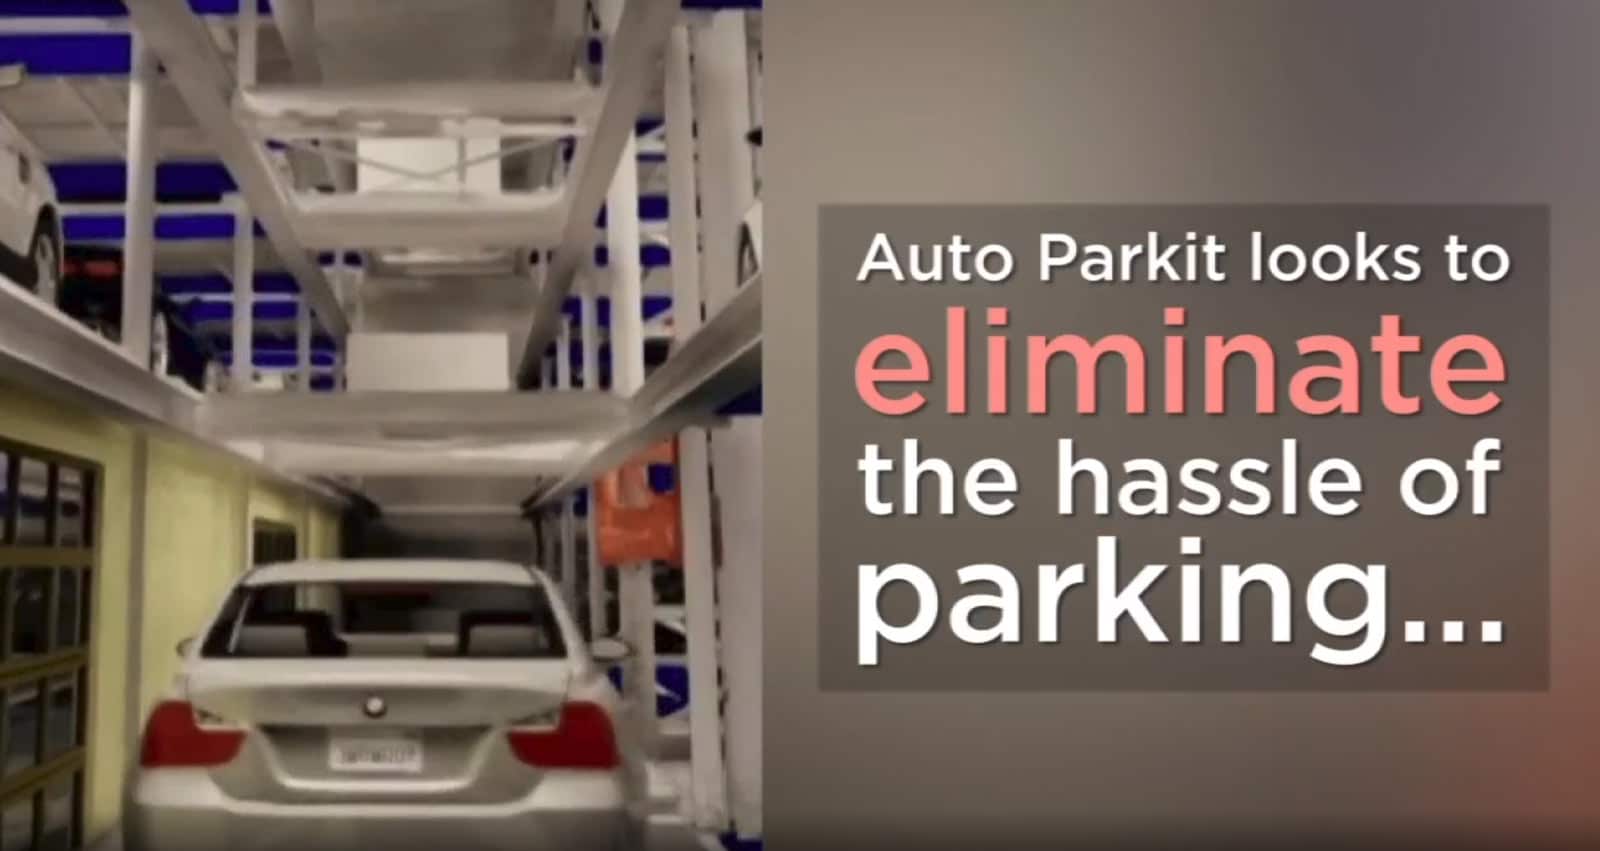 ABC7 – Automated garage company aims to eliminate parking hassles